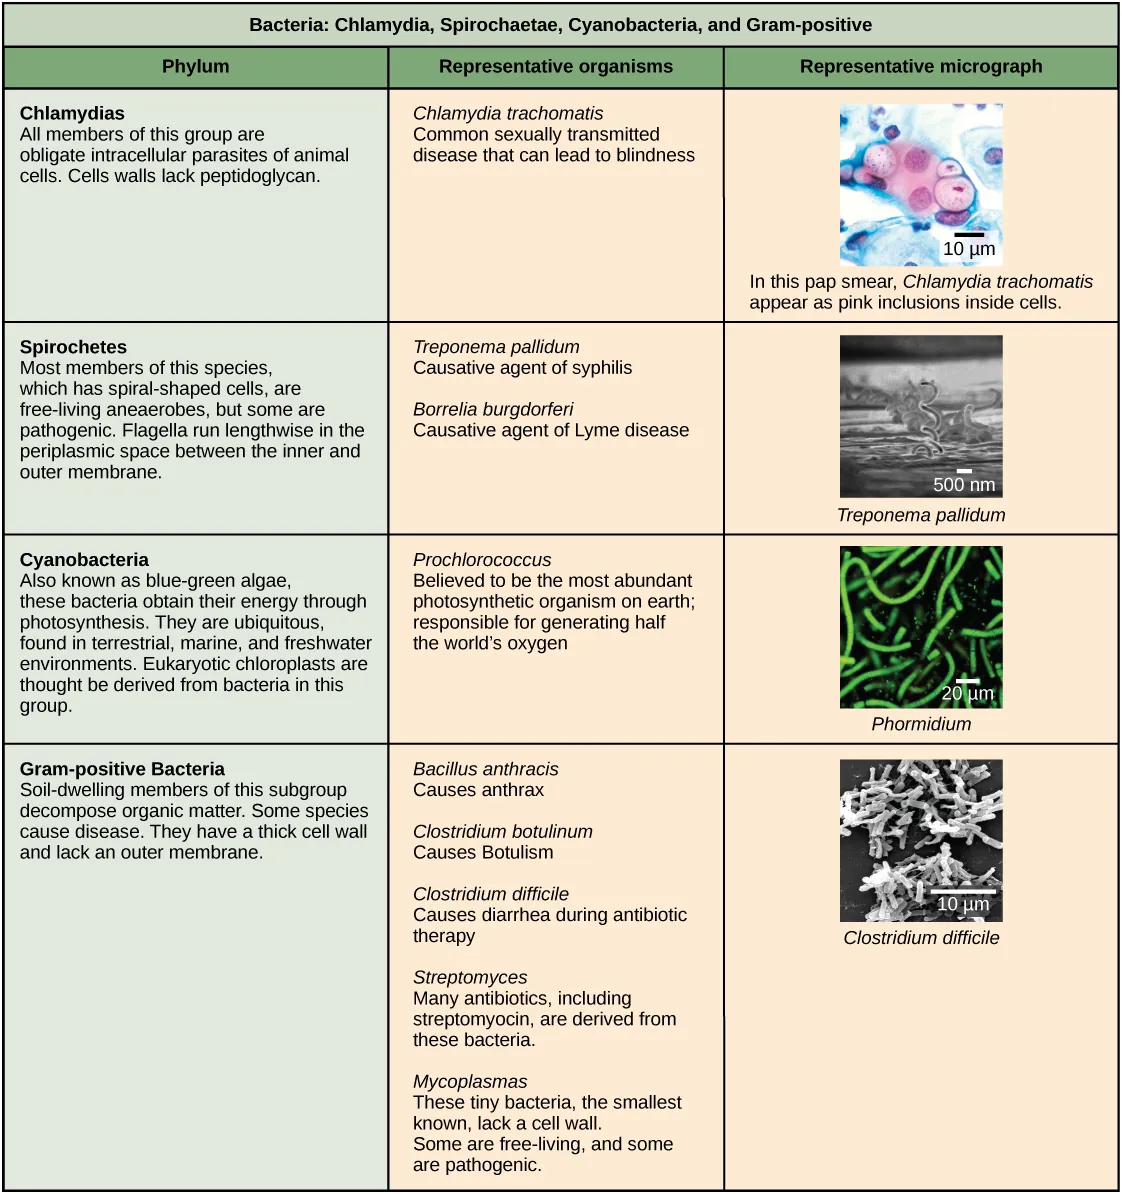 This table that describes four types of bacteria, Chlamydia, Spirochaetae, Cyanobacteria, and Gram-positive. The table is organized by phylum, their representative organisms, and a representative micrograph